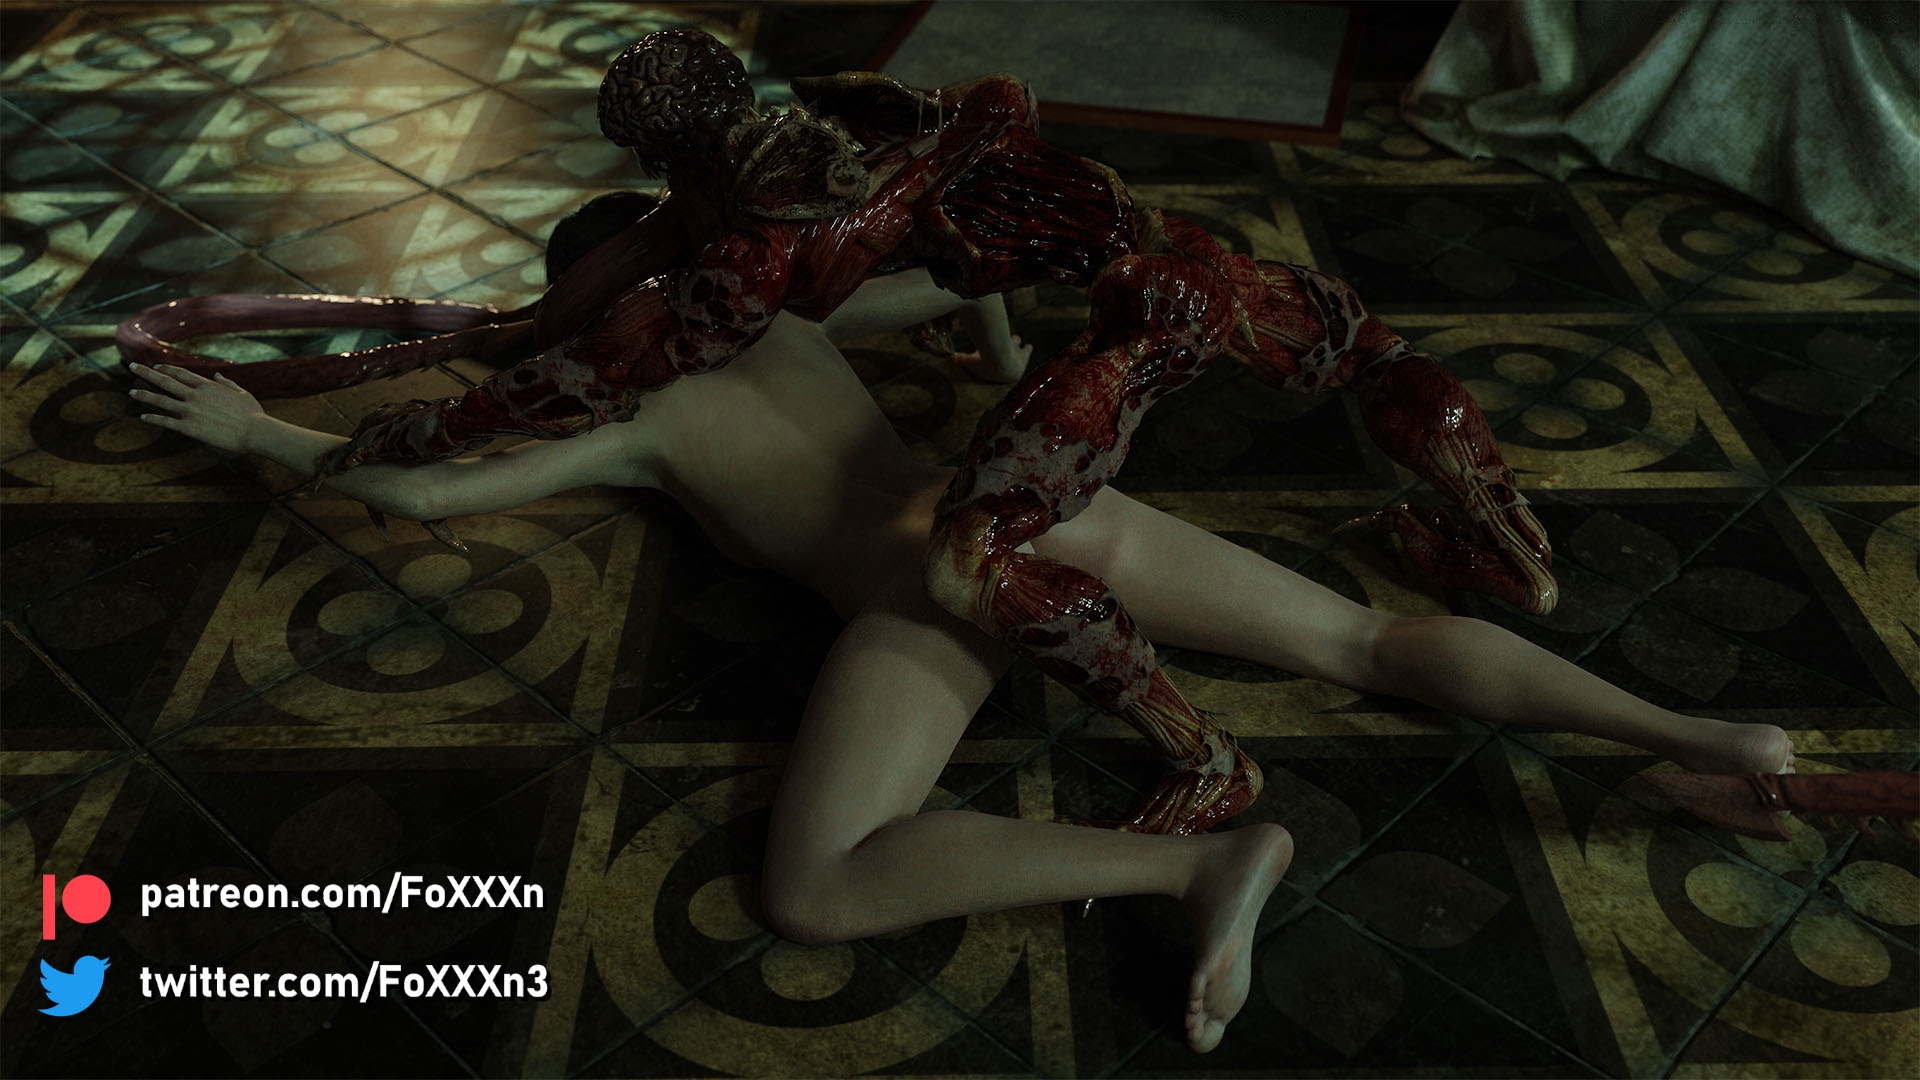 Licker Ambush Jill Valentine Claire Redfield Resident Evil Resident Evil 3 Remake Resident Evil 2 Remake Licker Naked Clothed Monster Caught Rape Tentacles Tentacle Tongue Tongue Out 11